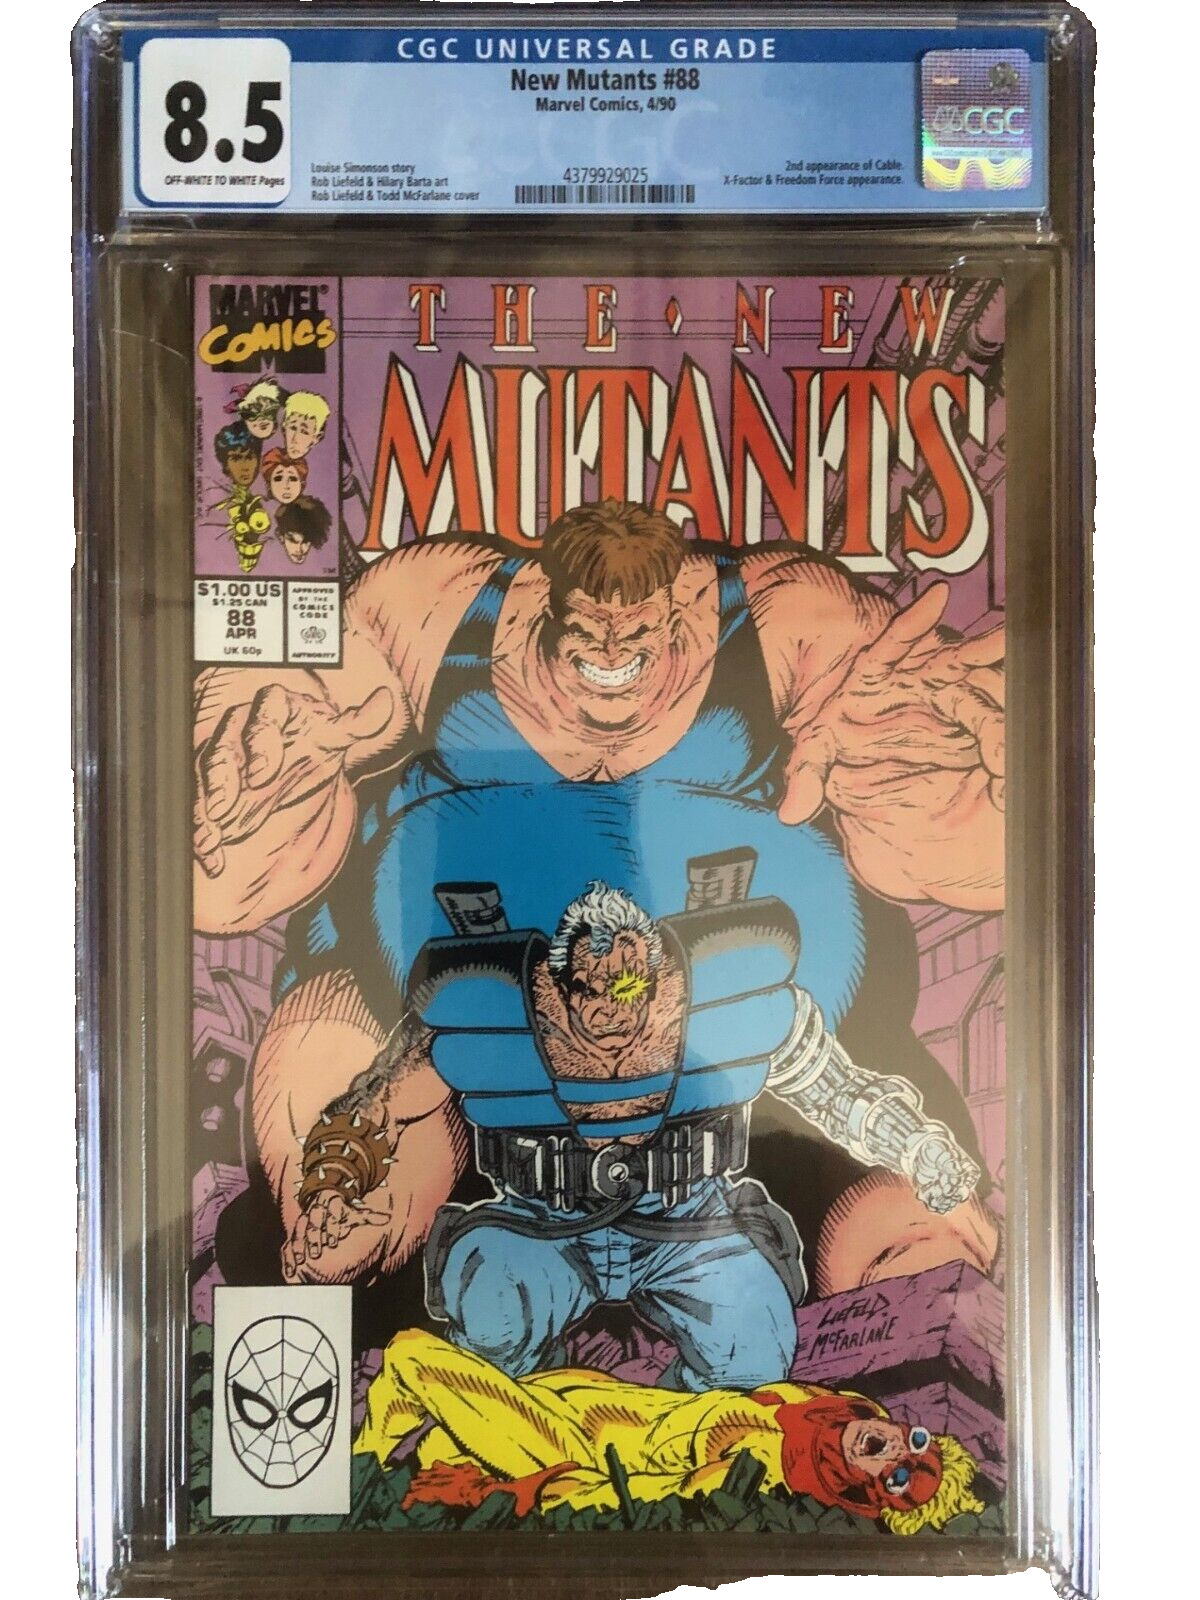 The New Mutants #88 92nd app. of Cable), 4/90, Marvel Comics, CGC Grade 8.5 VF+